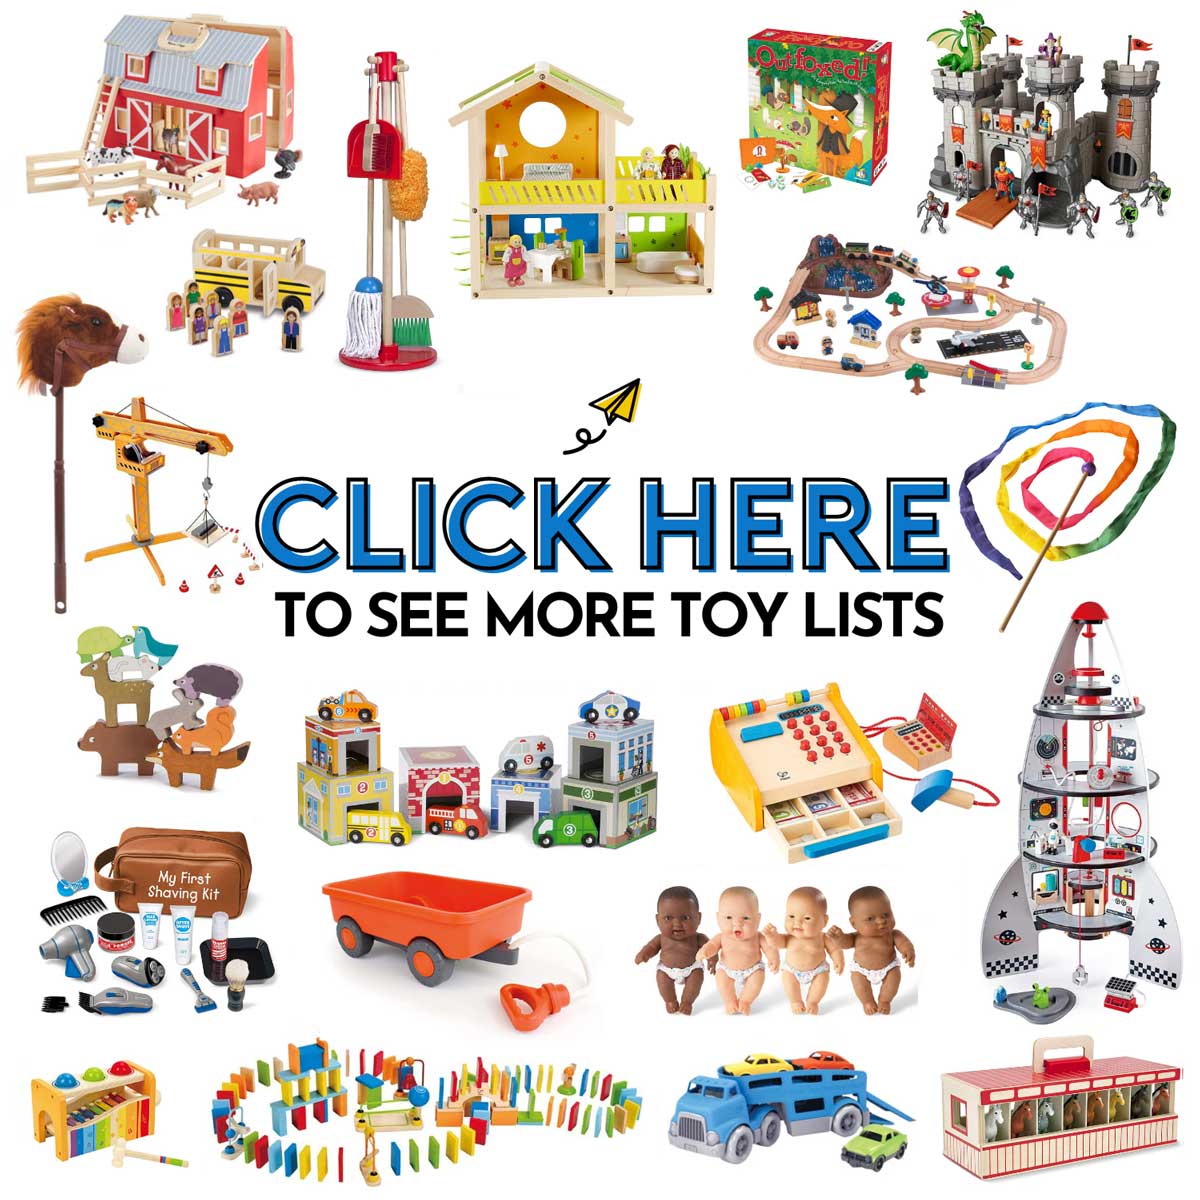 Click here to see more toy lists (image is a white background with photos of different toys)